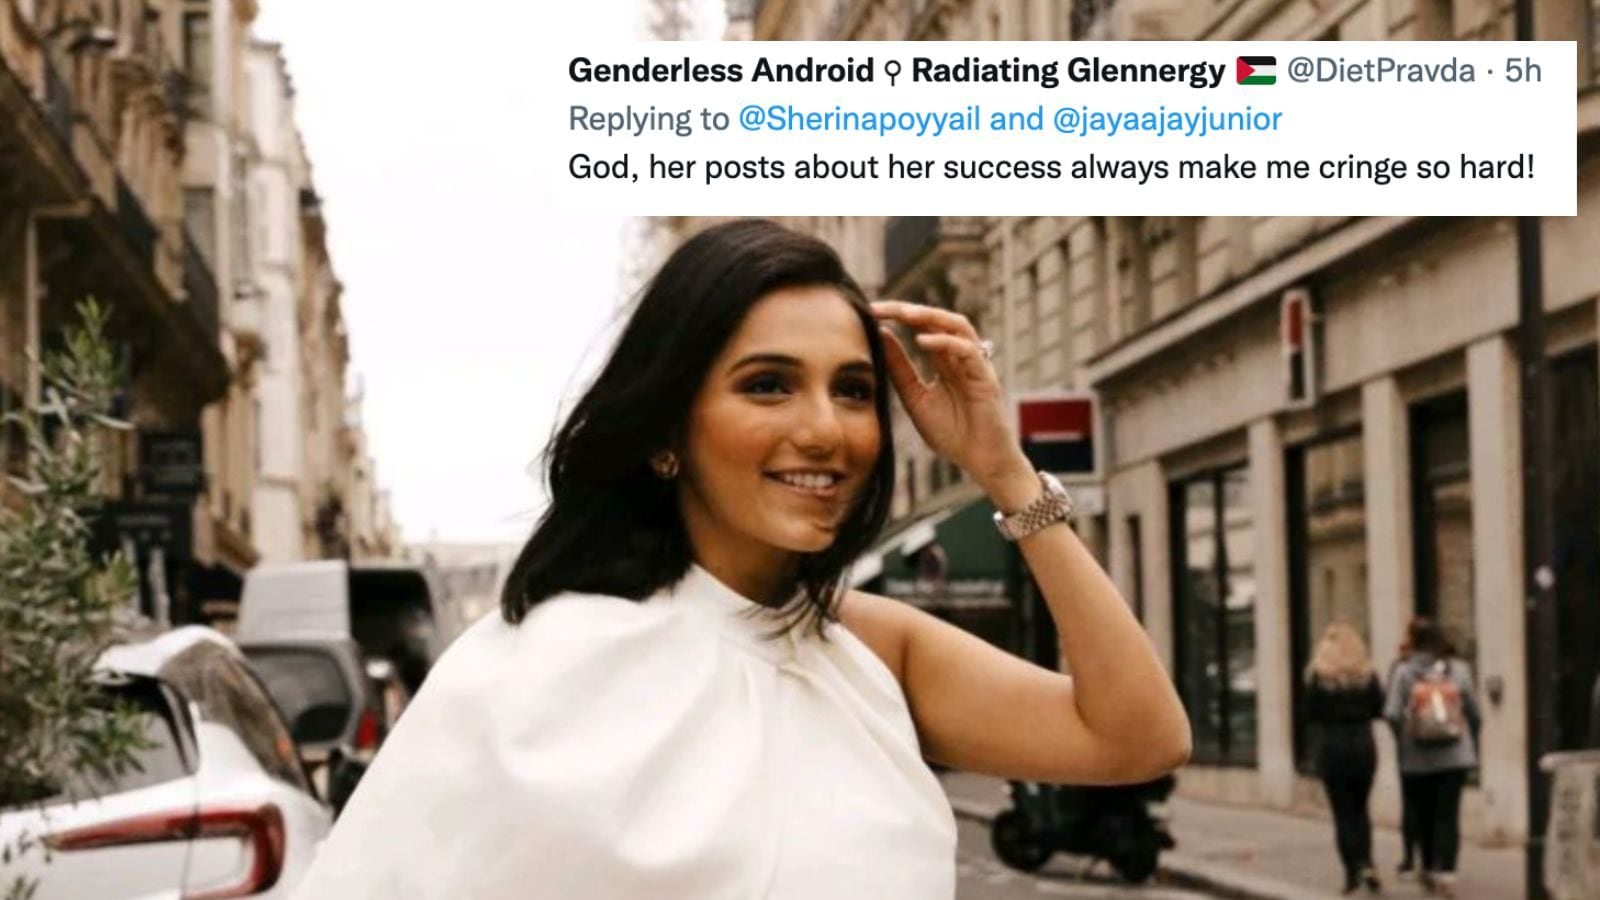 Influencer Shares About Her 'Thriving' Business on LinkedIn, Gets Reality Check on Twitter